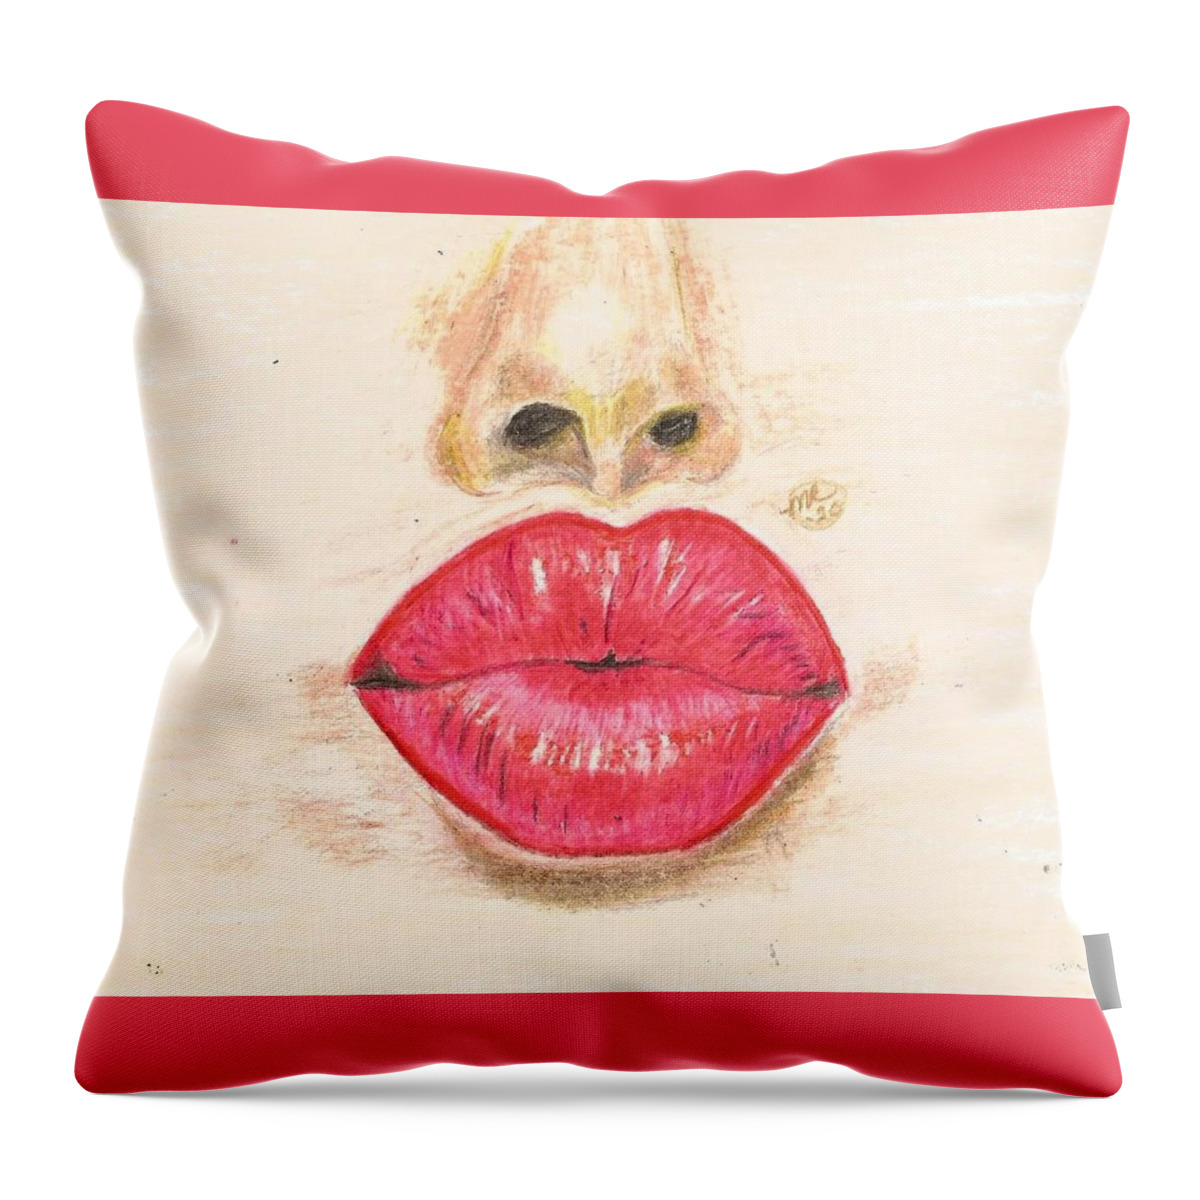 Sexy Red Lips Throw Pillow featuring the painting Sexy Red Lips by Monica Resinger